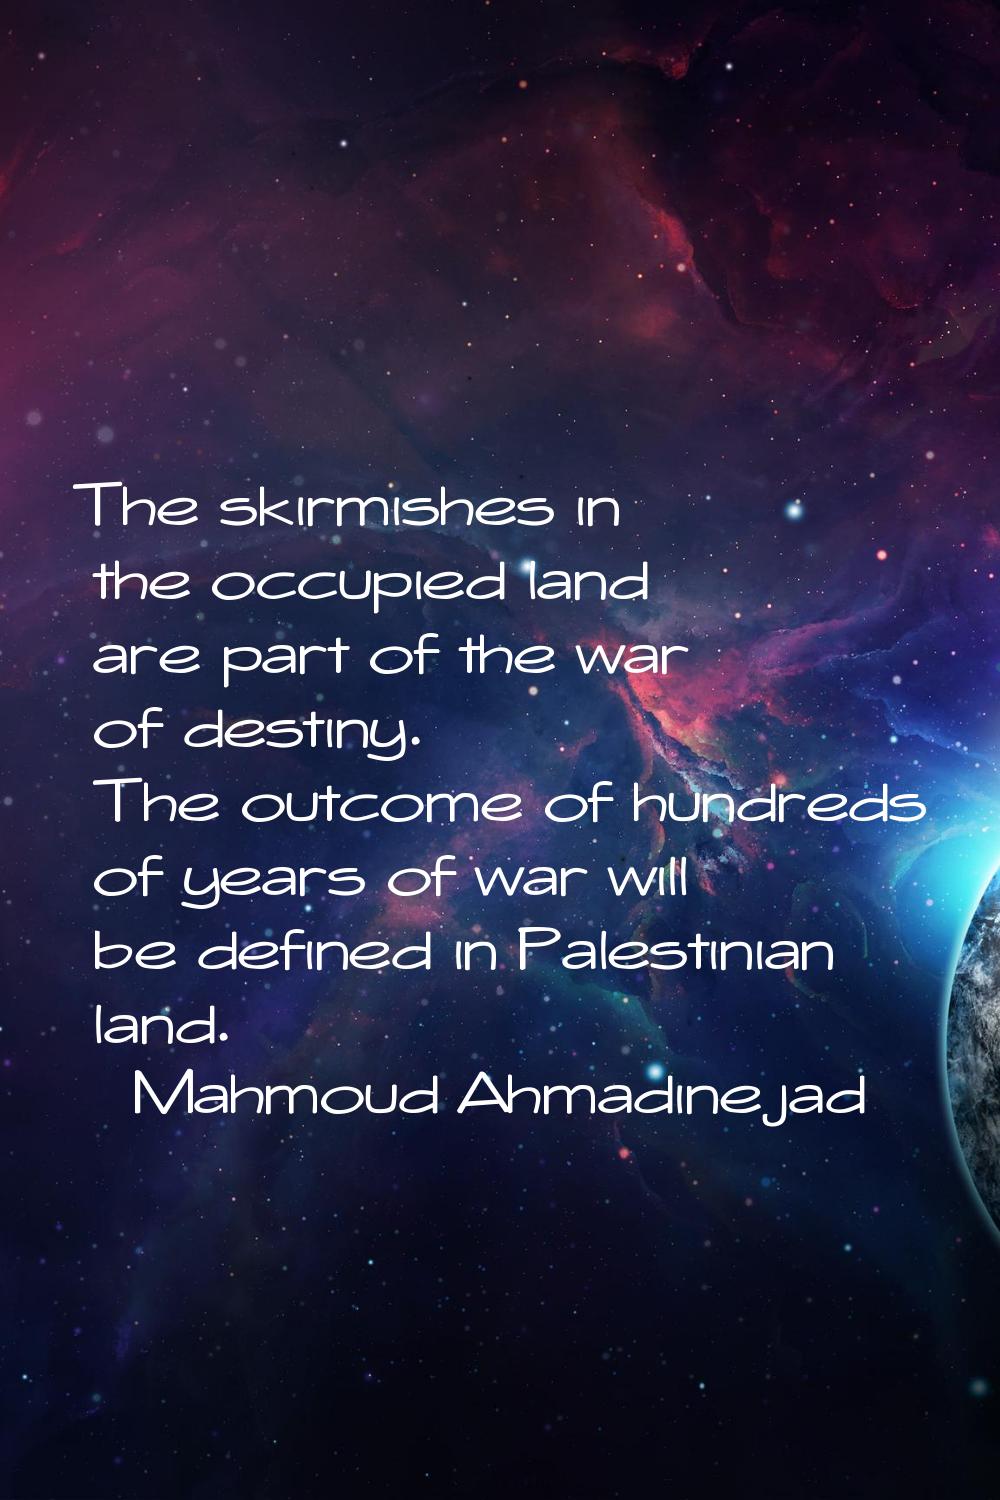 The skirmishes in the occupied land are part of the war of destiny. The outcome of hundreds of year